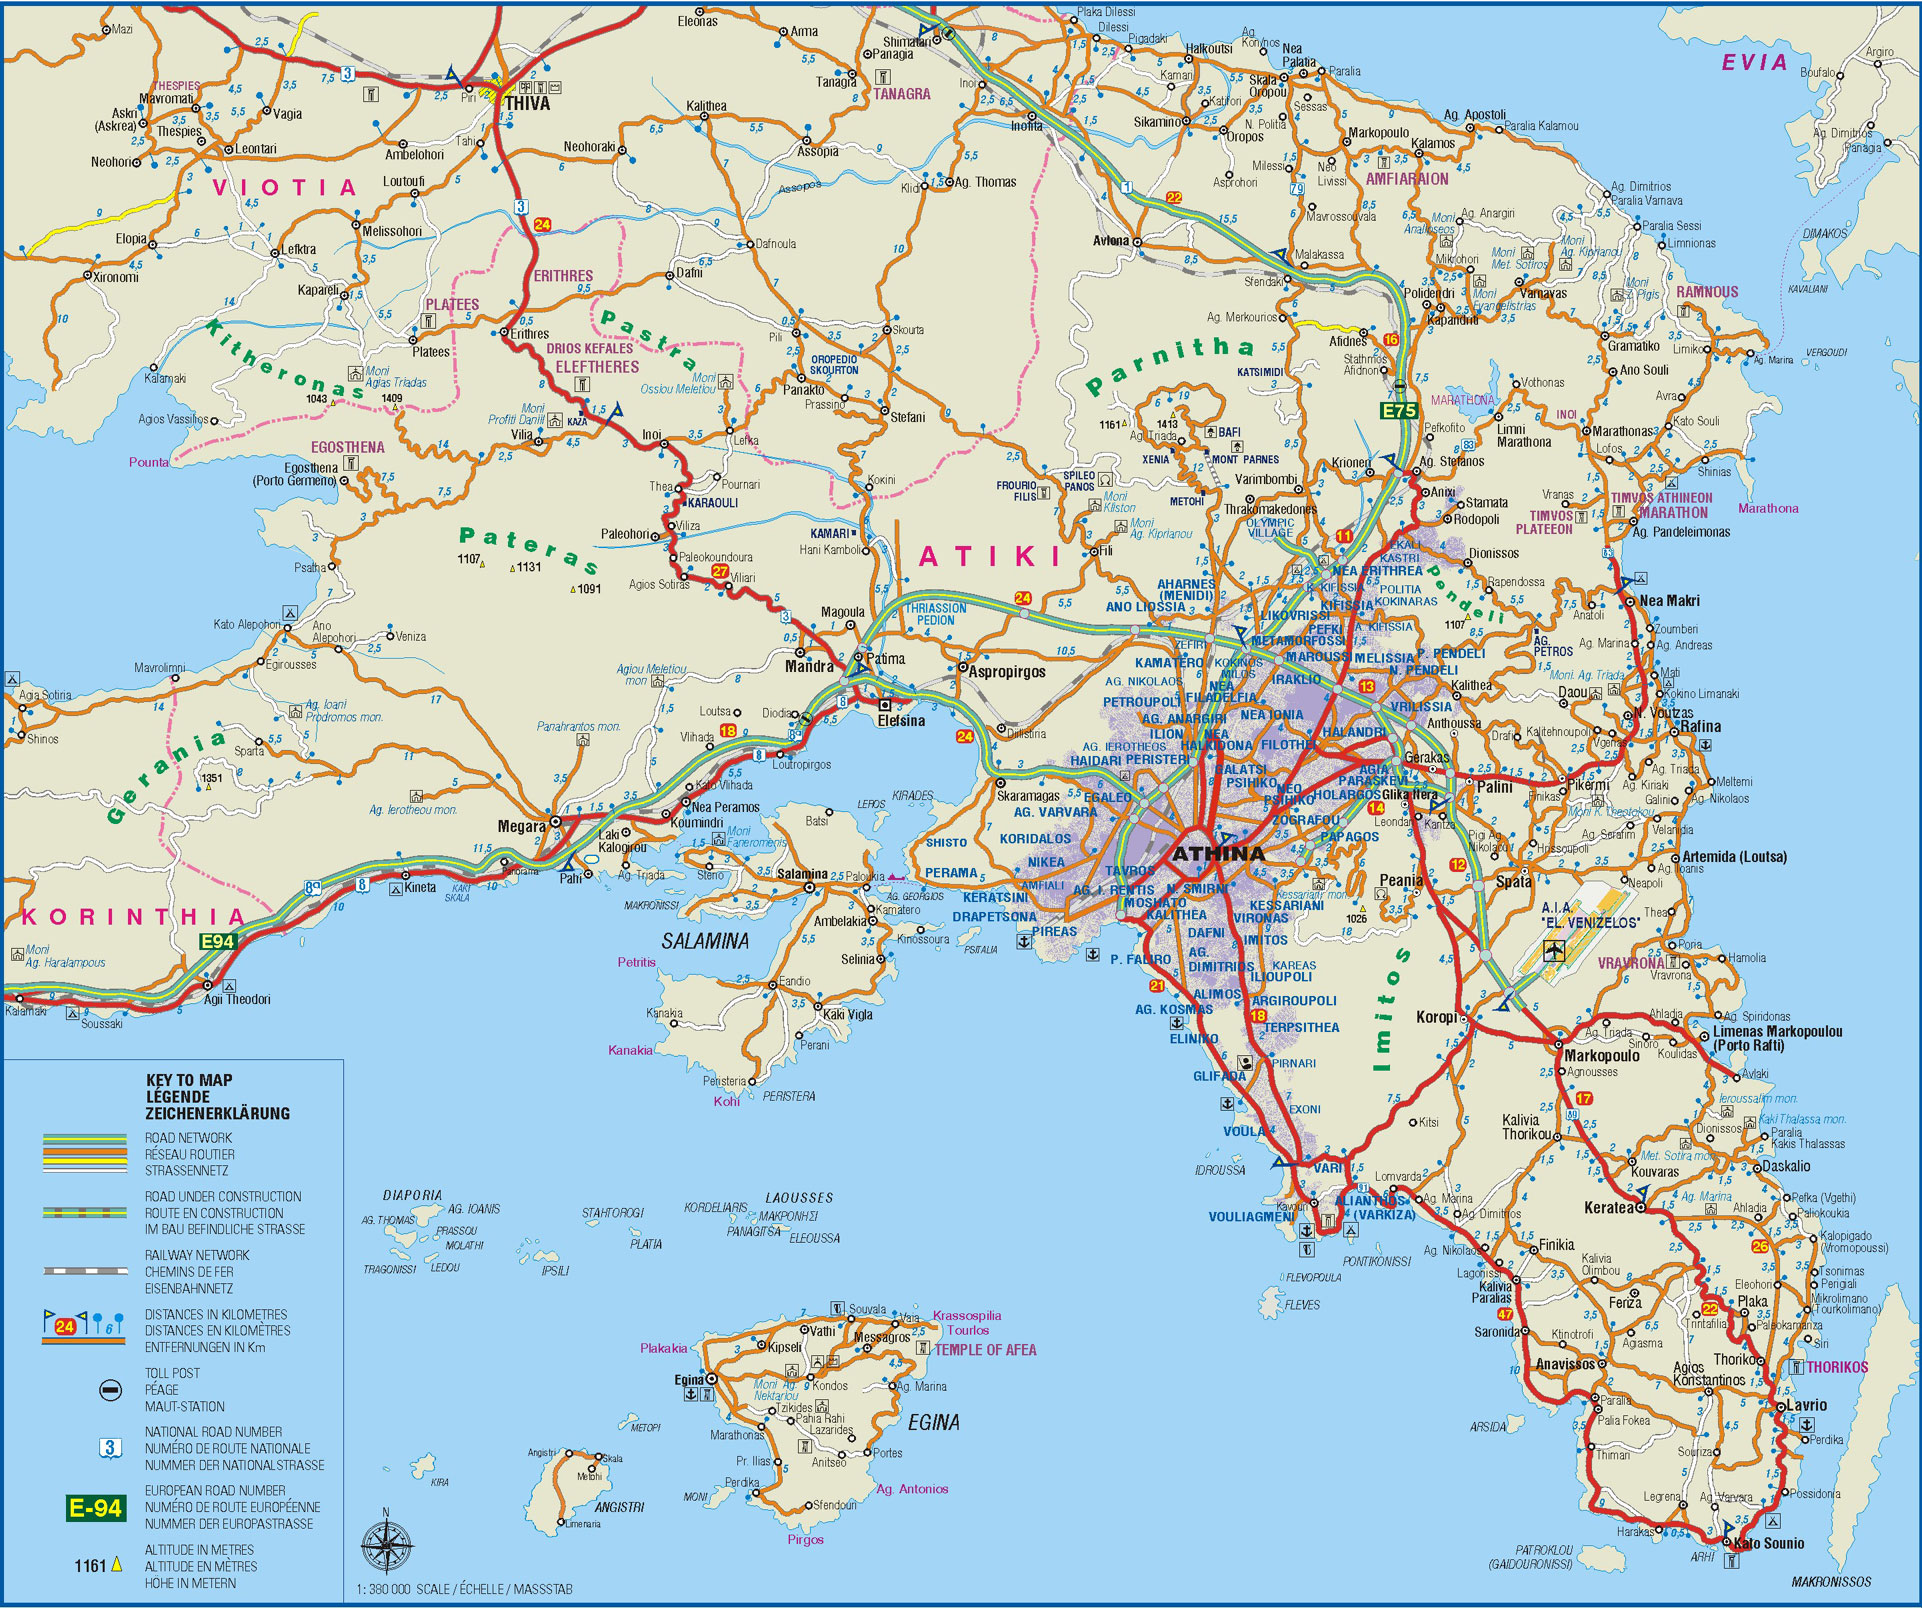 ATHENS MAPS | Athens center map, airport map, attica map, metro map